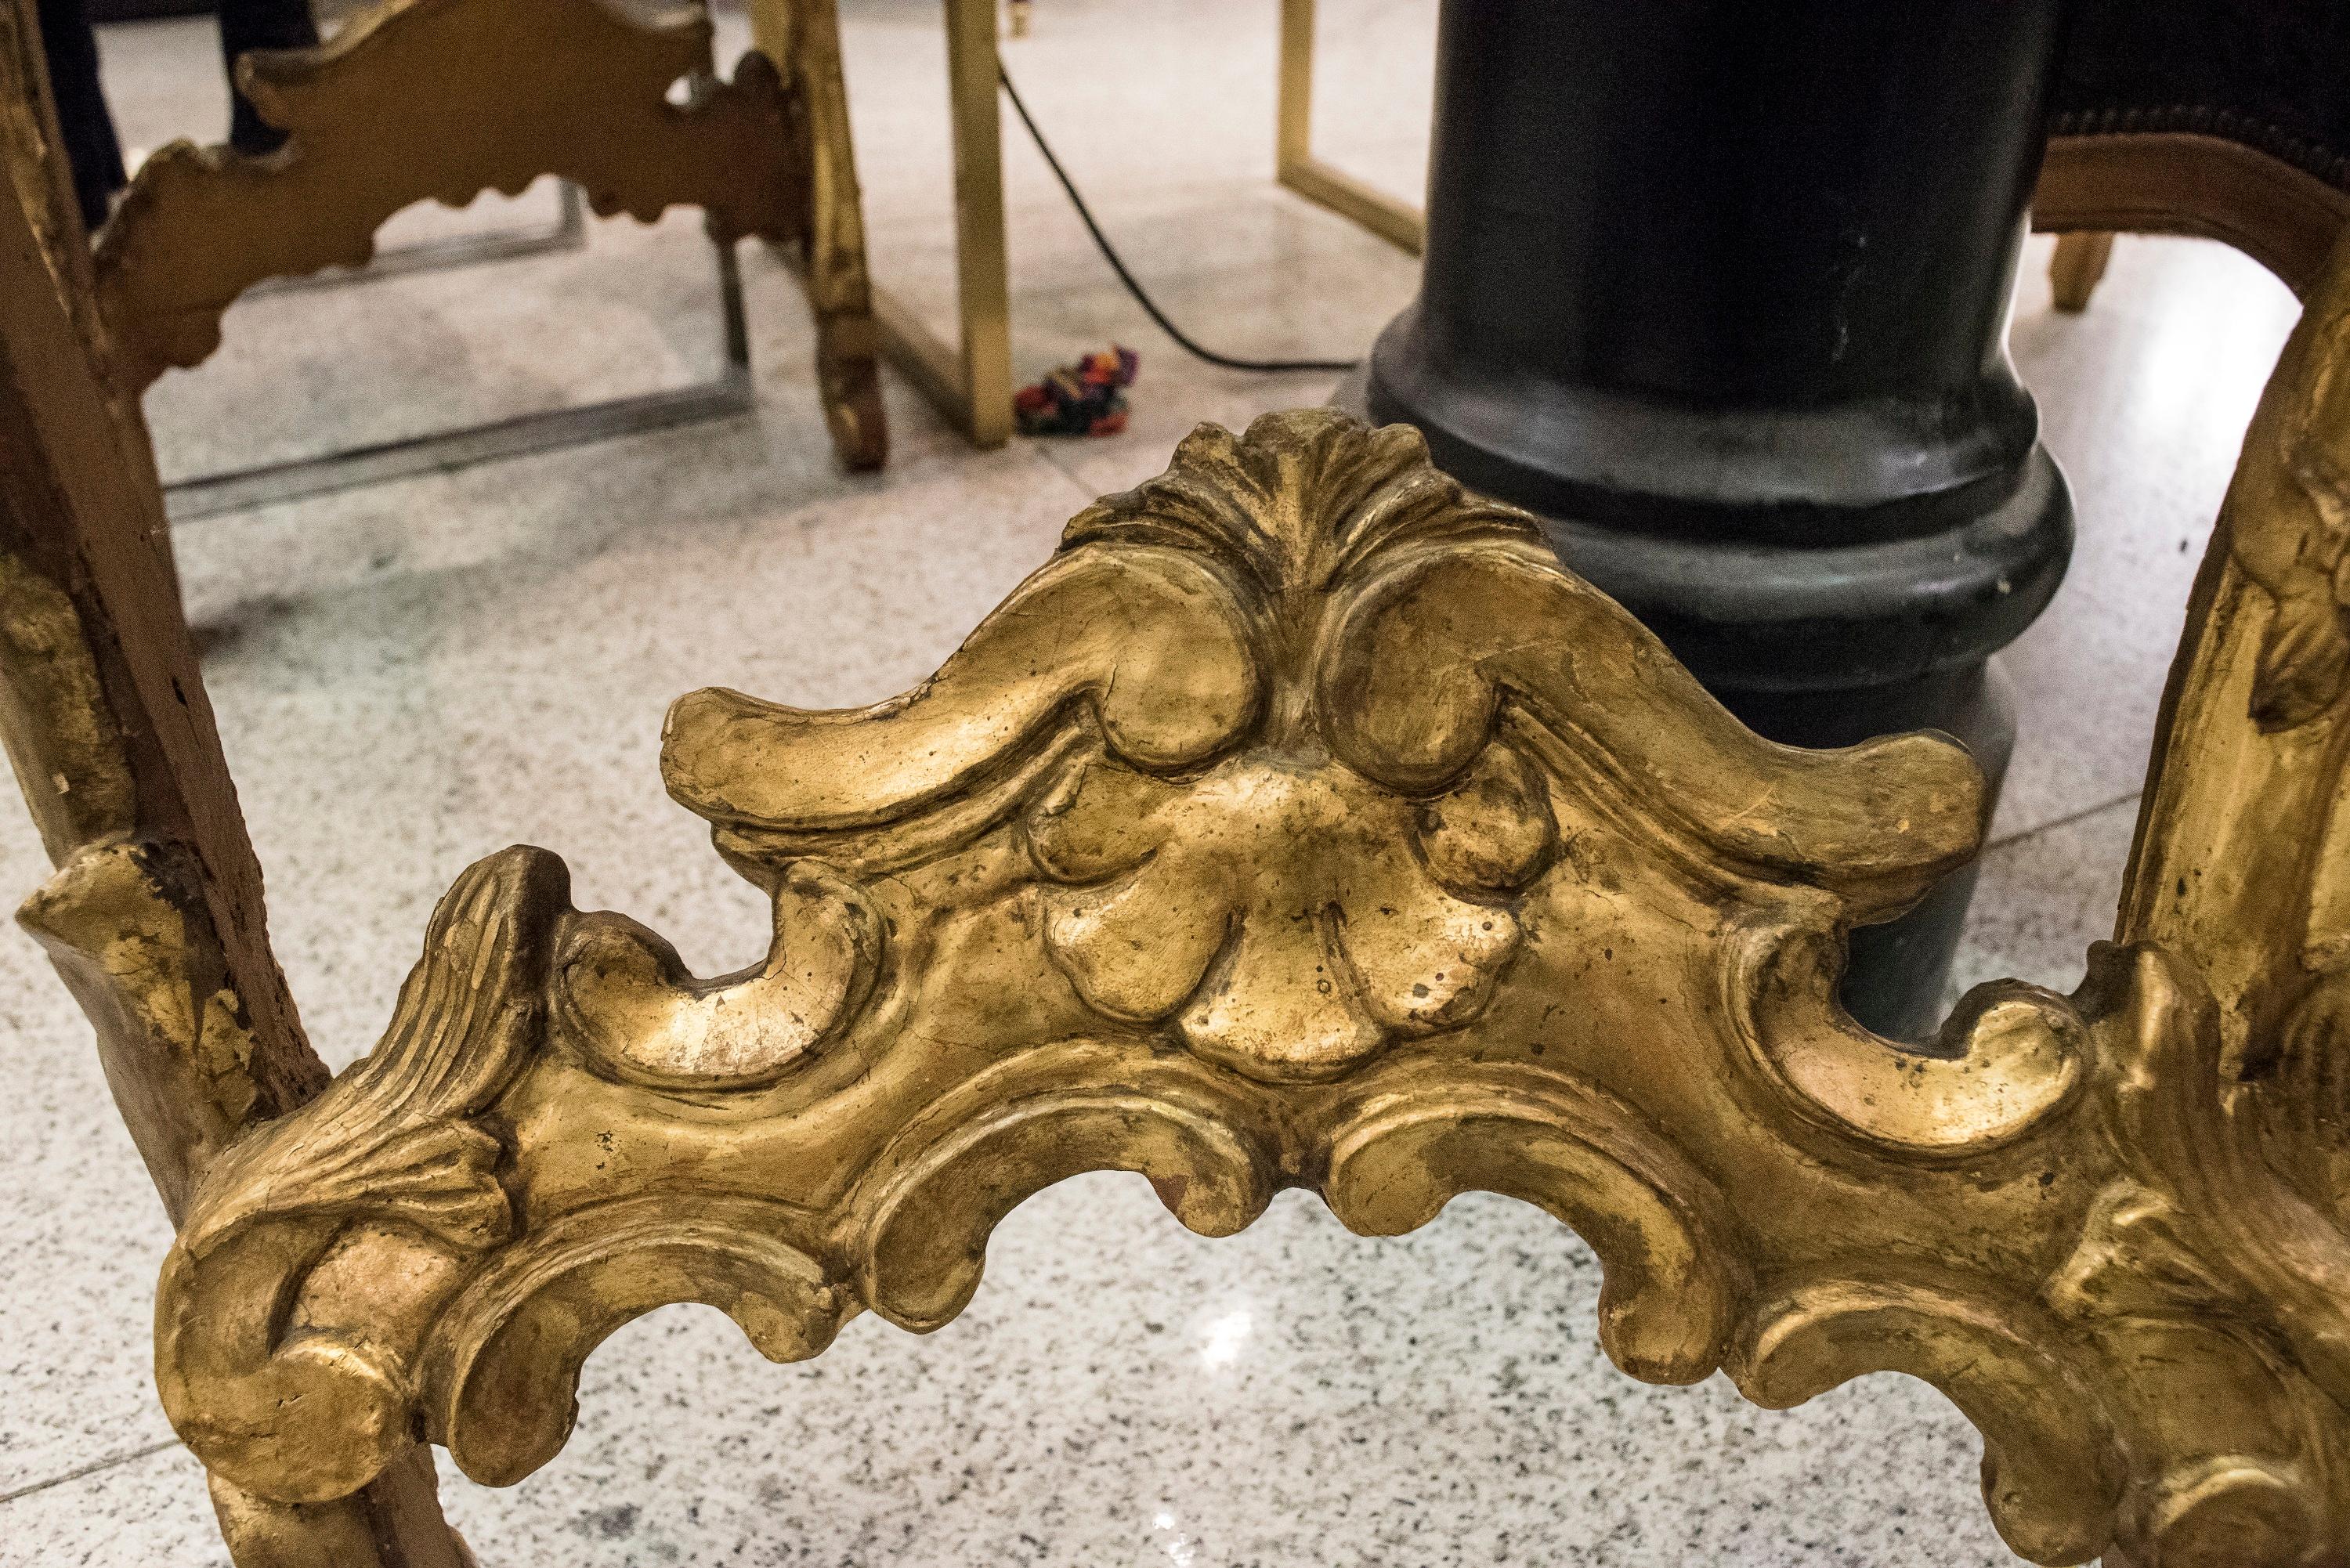 Stunning Venetian S XVII carved and gilt console. Carved side legs pads. Frontal face carved with a head of angel. Top on marble wood. 
A extraordinary console table Italian Baroque, from a private Venetian collection.
A piece very difficult to